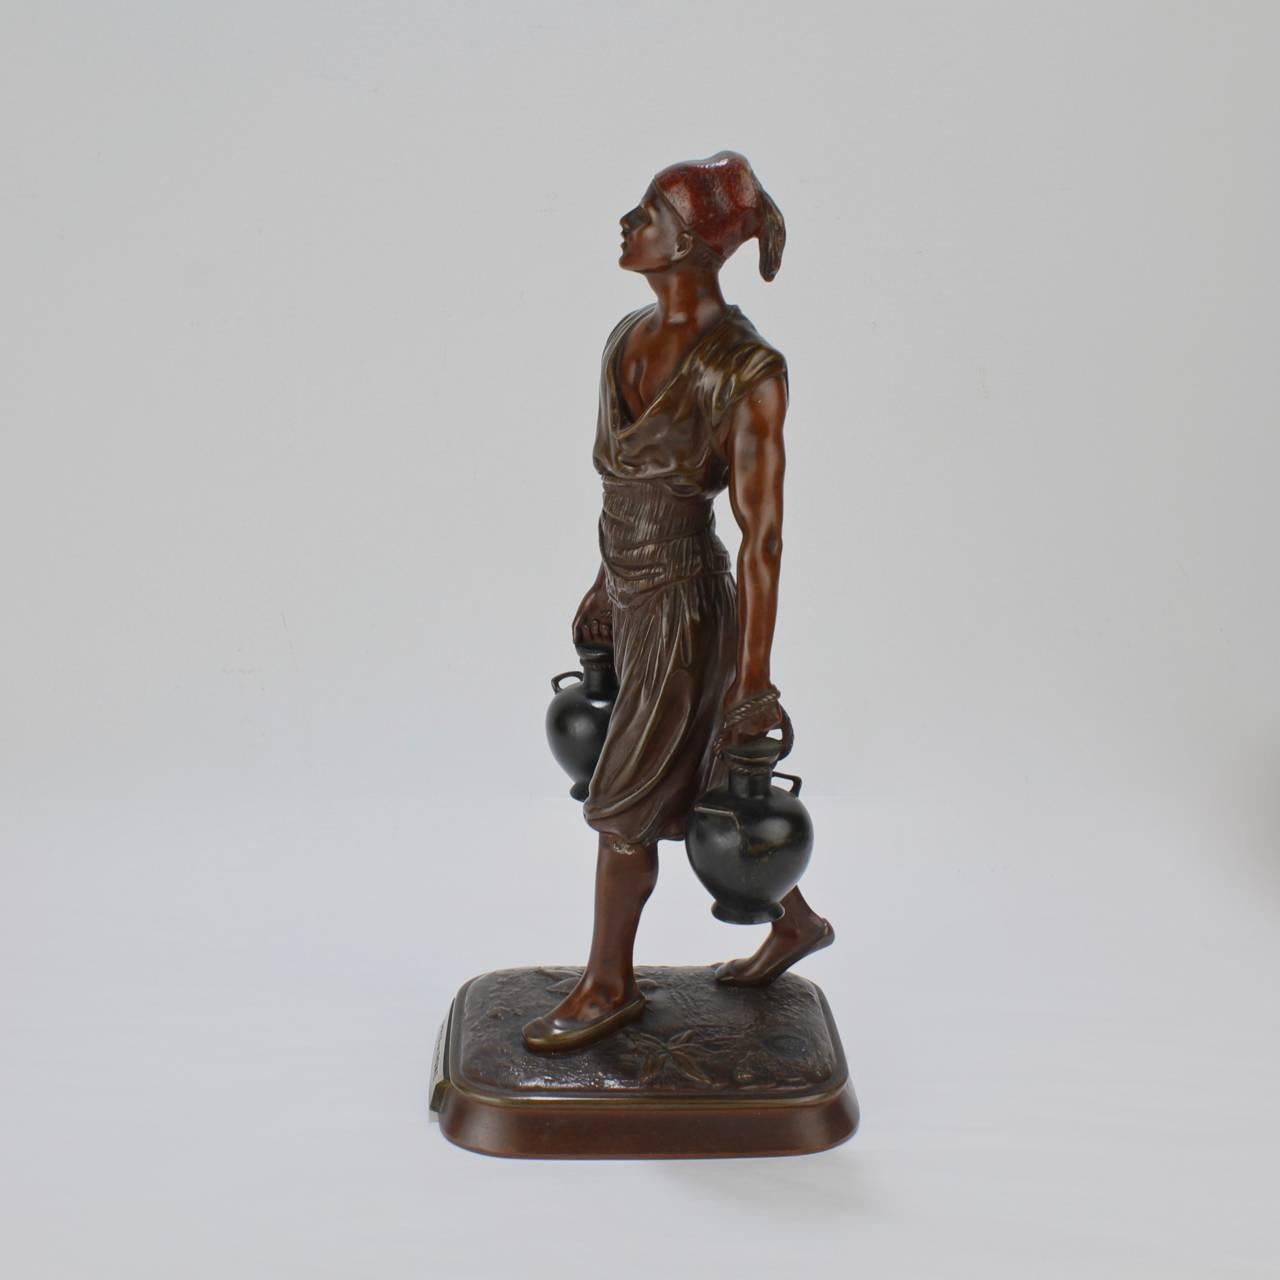 A finely cast French Orientalist sculpture after Jean-Didier Debut of a Tunisian Water Carrier cast by the Pinedo Bronzier foundry of Paris.

Entitled: Porteur d' Eau Tunisien

The bronze depicts a robust young man in mid-stride bearing two